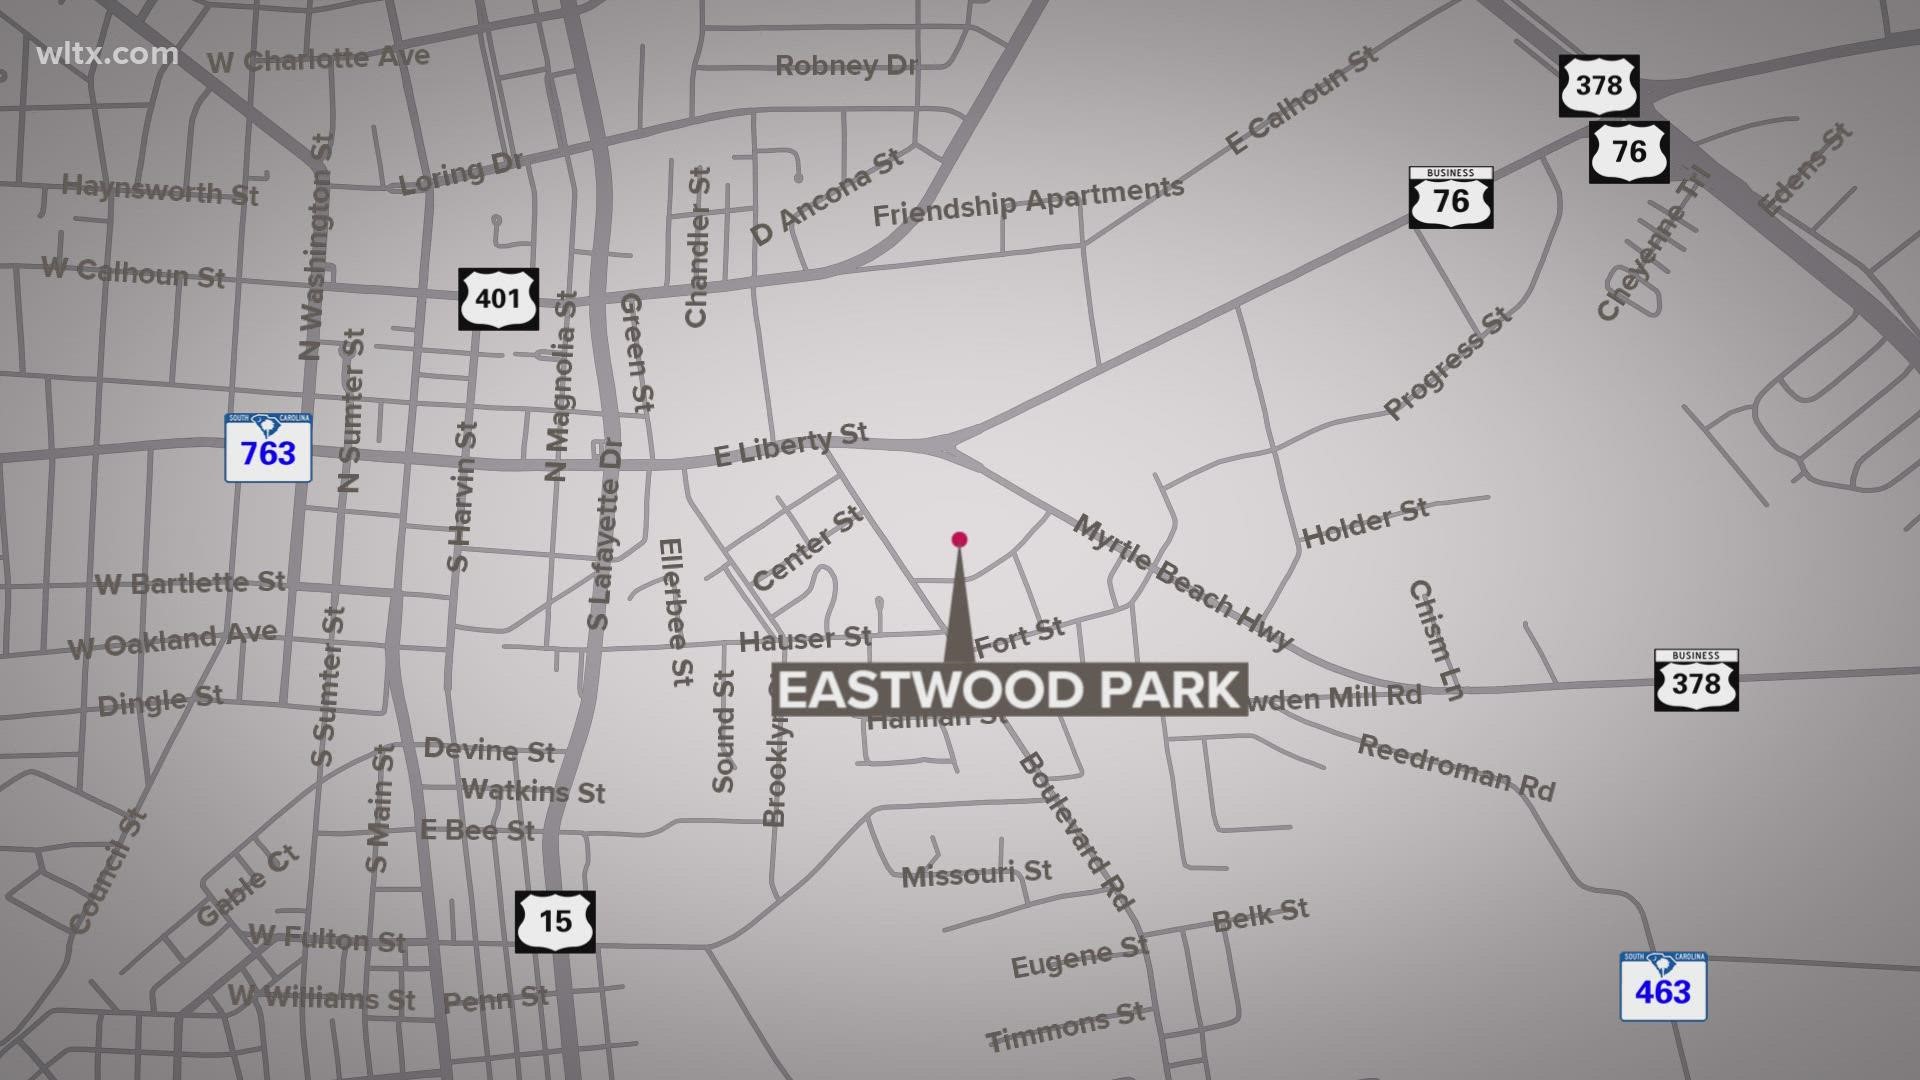 The shooting happened around 11:30 p.m. in the area of Eastwood Park near Boulevard Road.